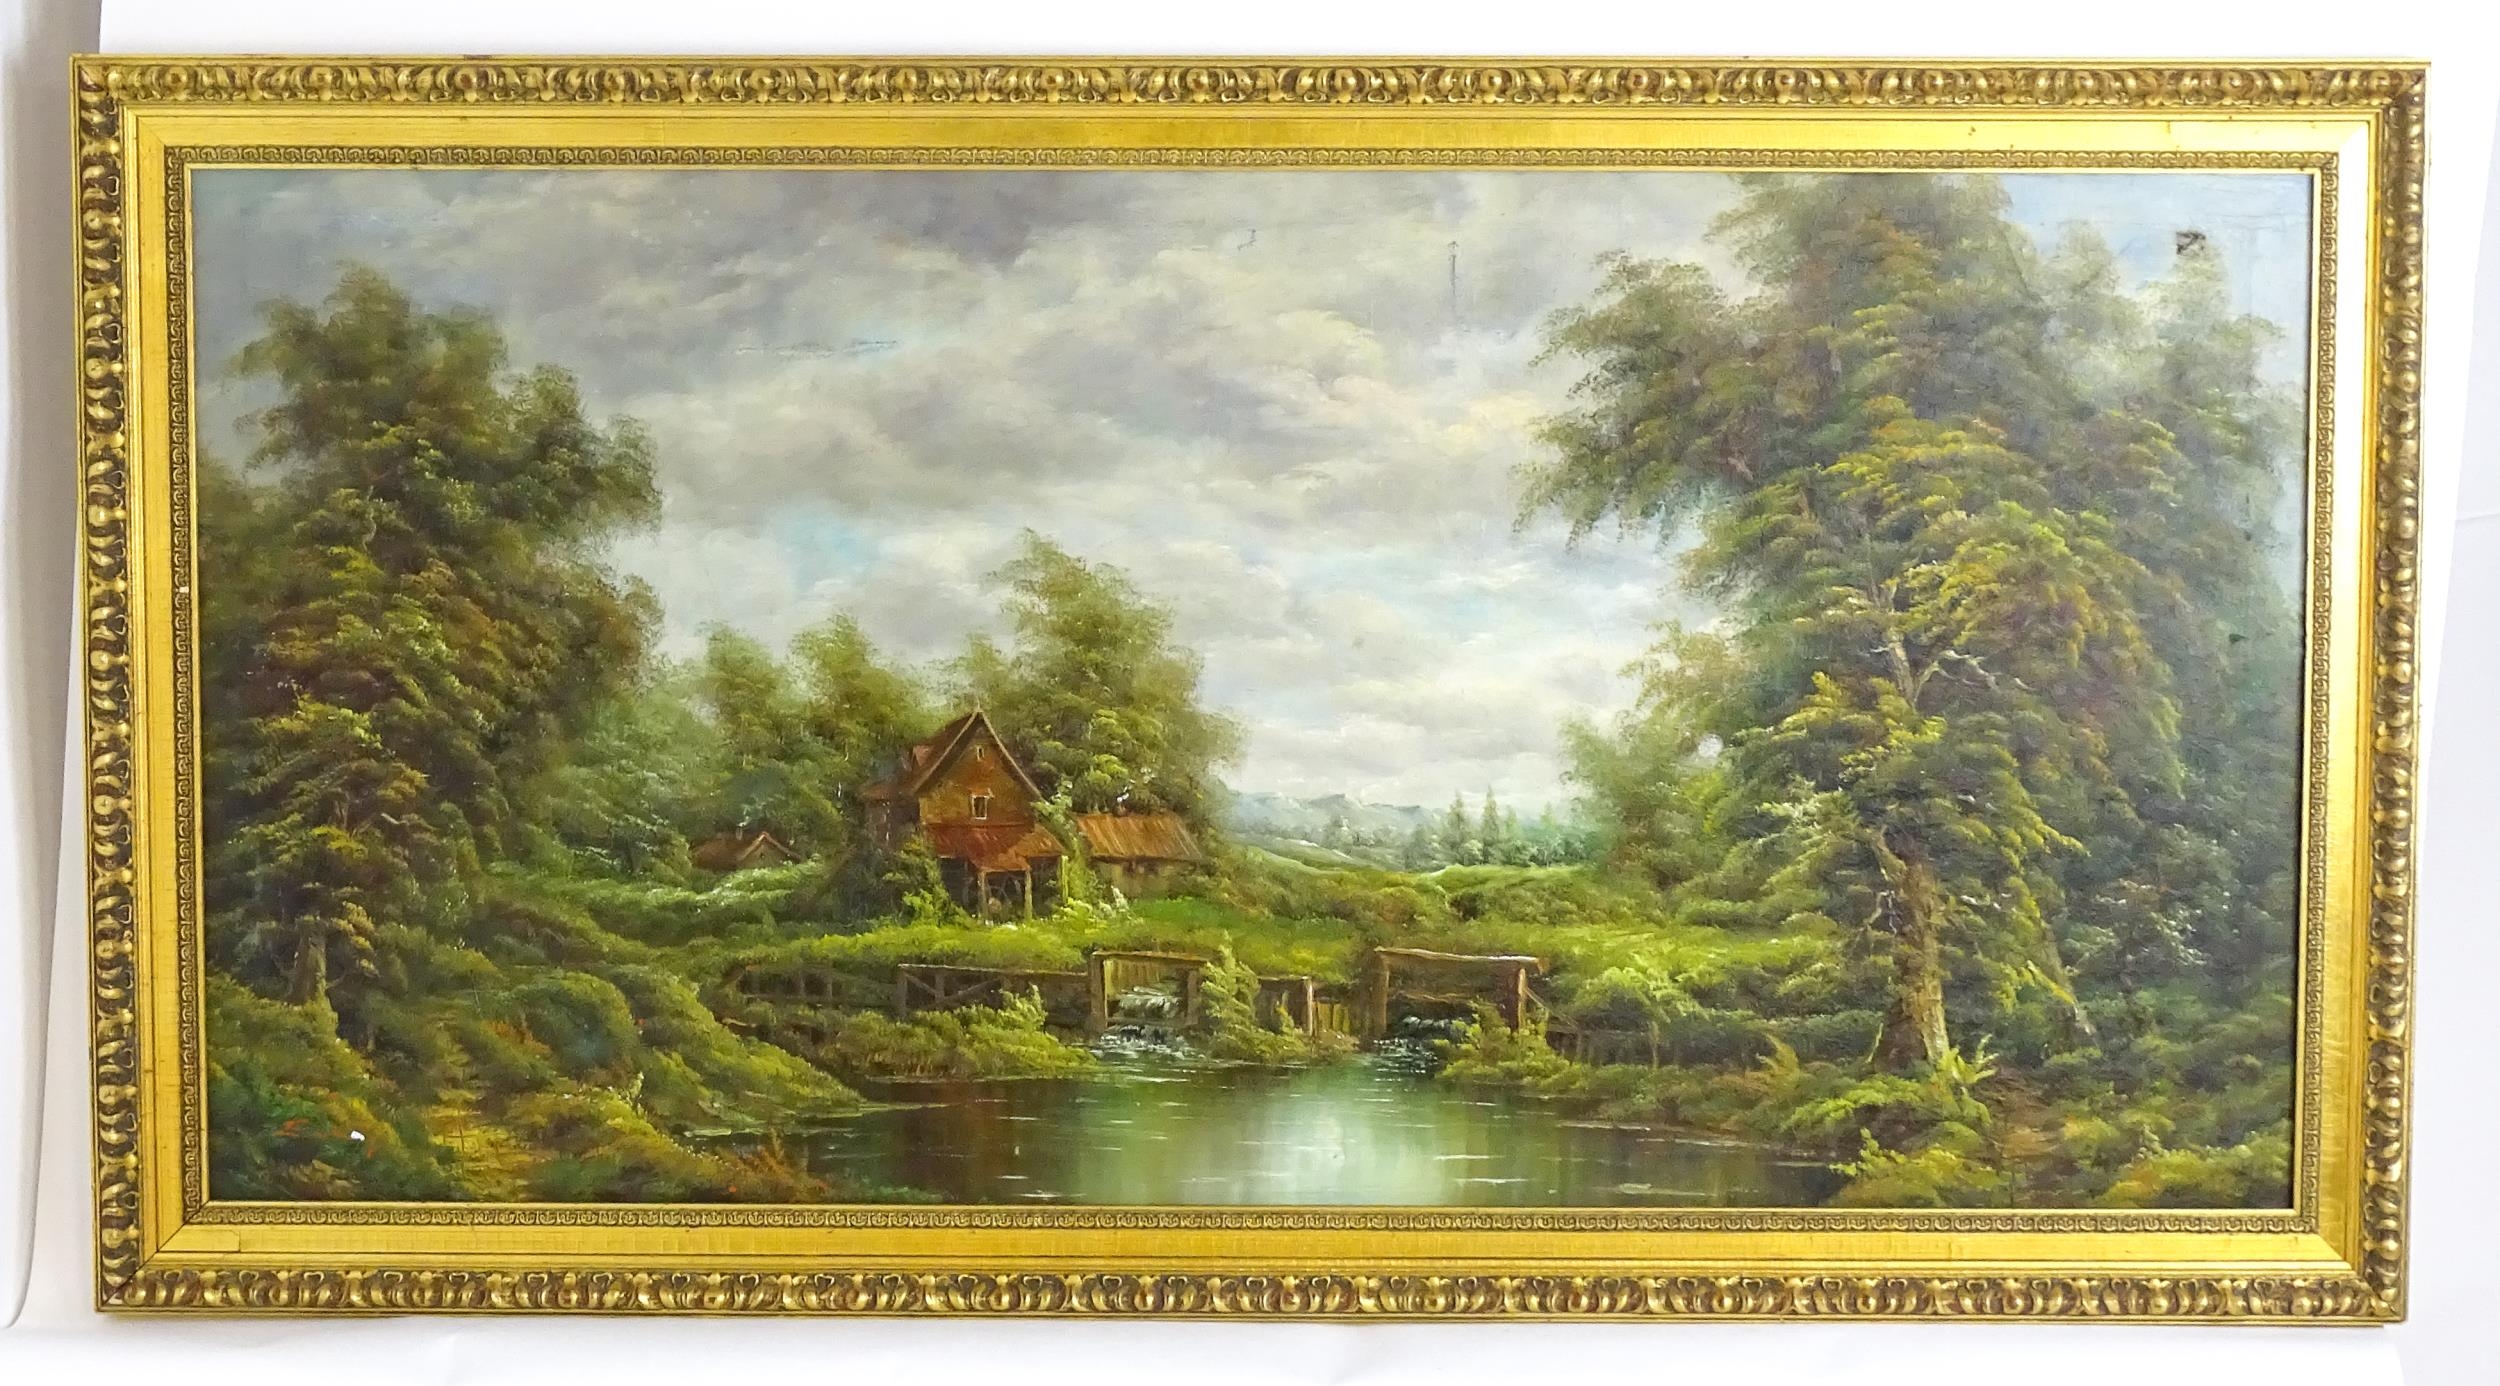 Late 19th / 20th century, English School, Oil on canvas, A wooded river landscape with watermill.